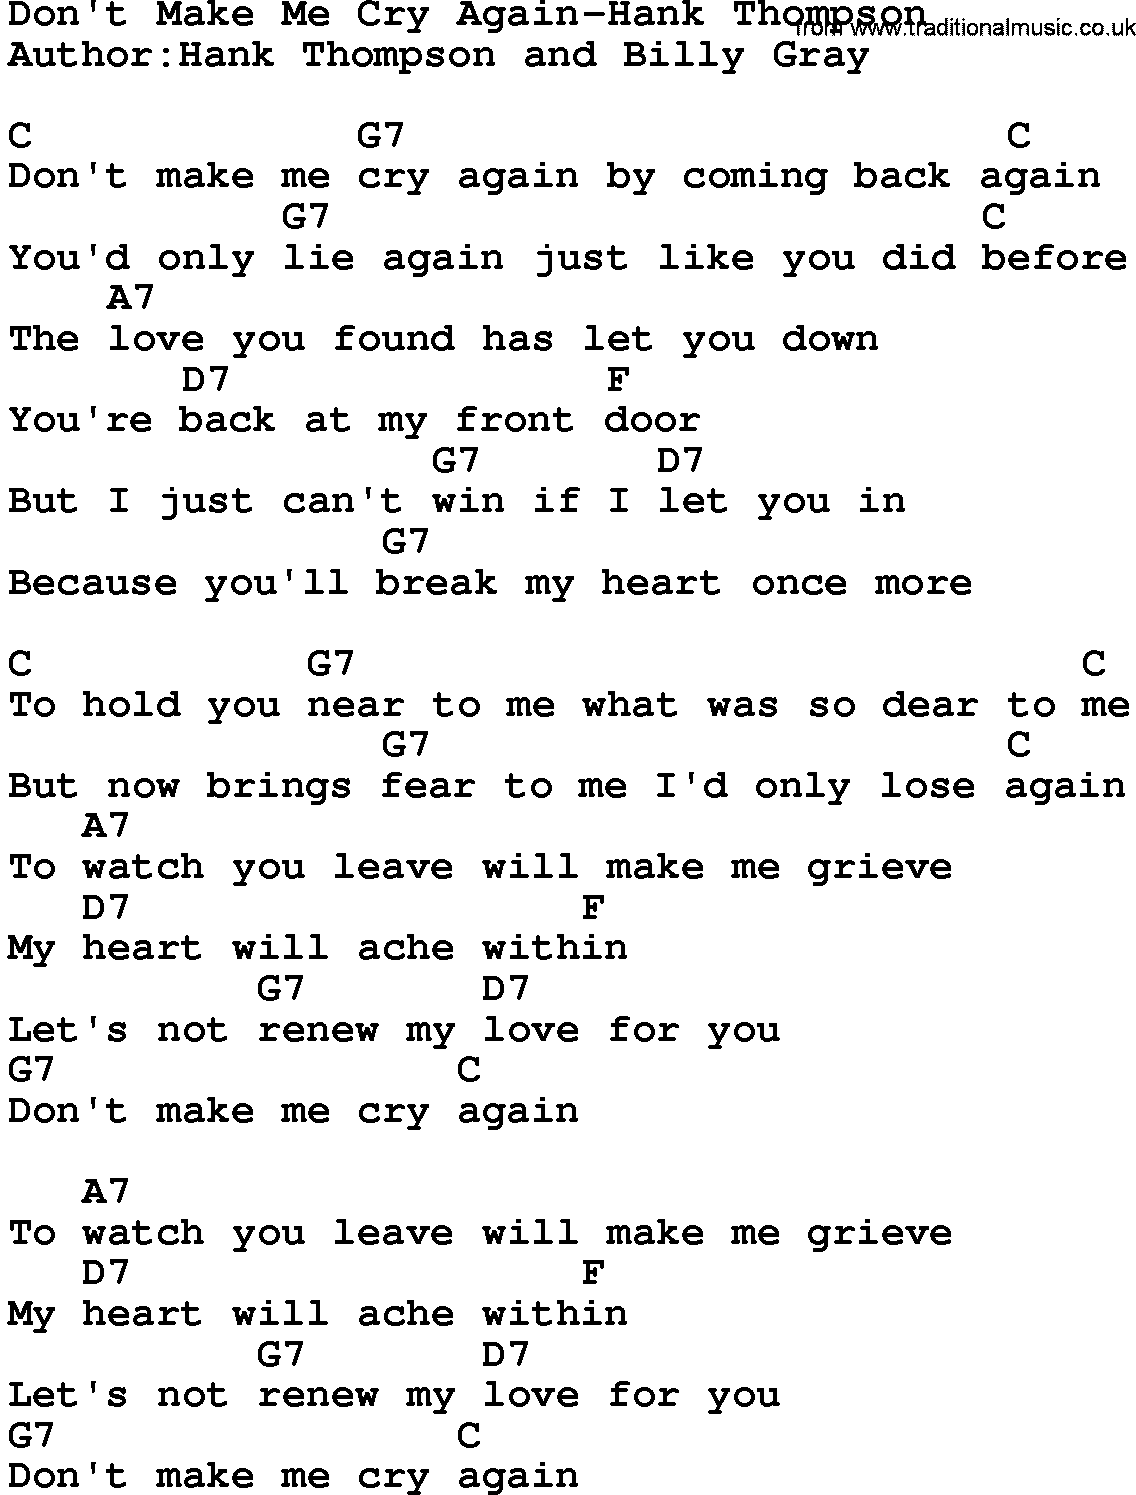 Country music song: Don't Make Me Cry Again-Hank Thompson lyrics and chords